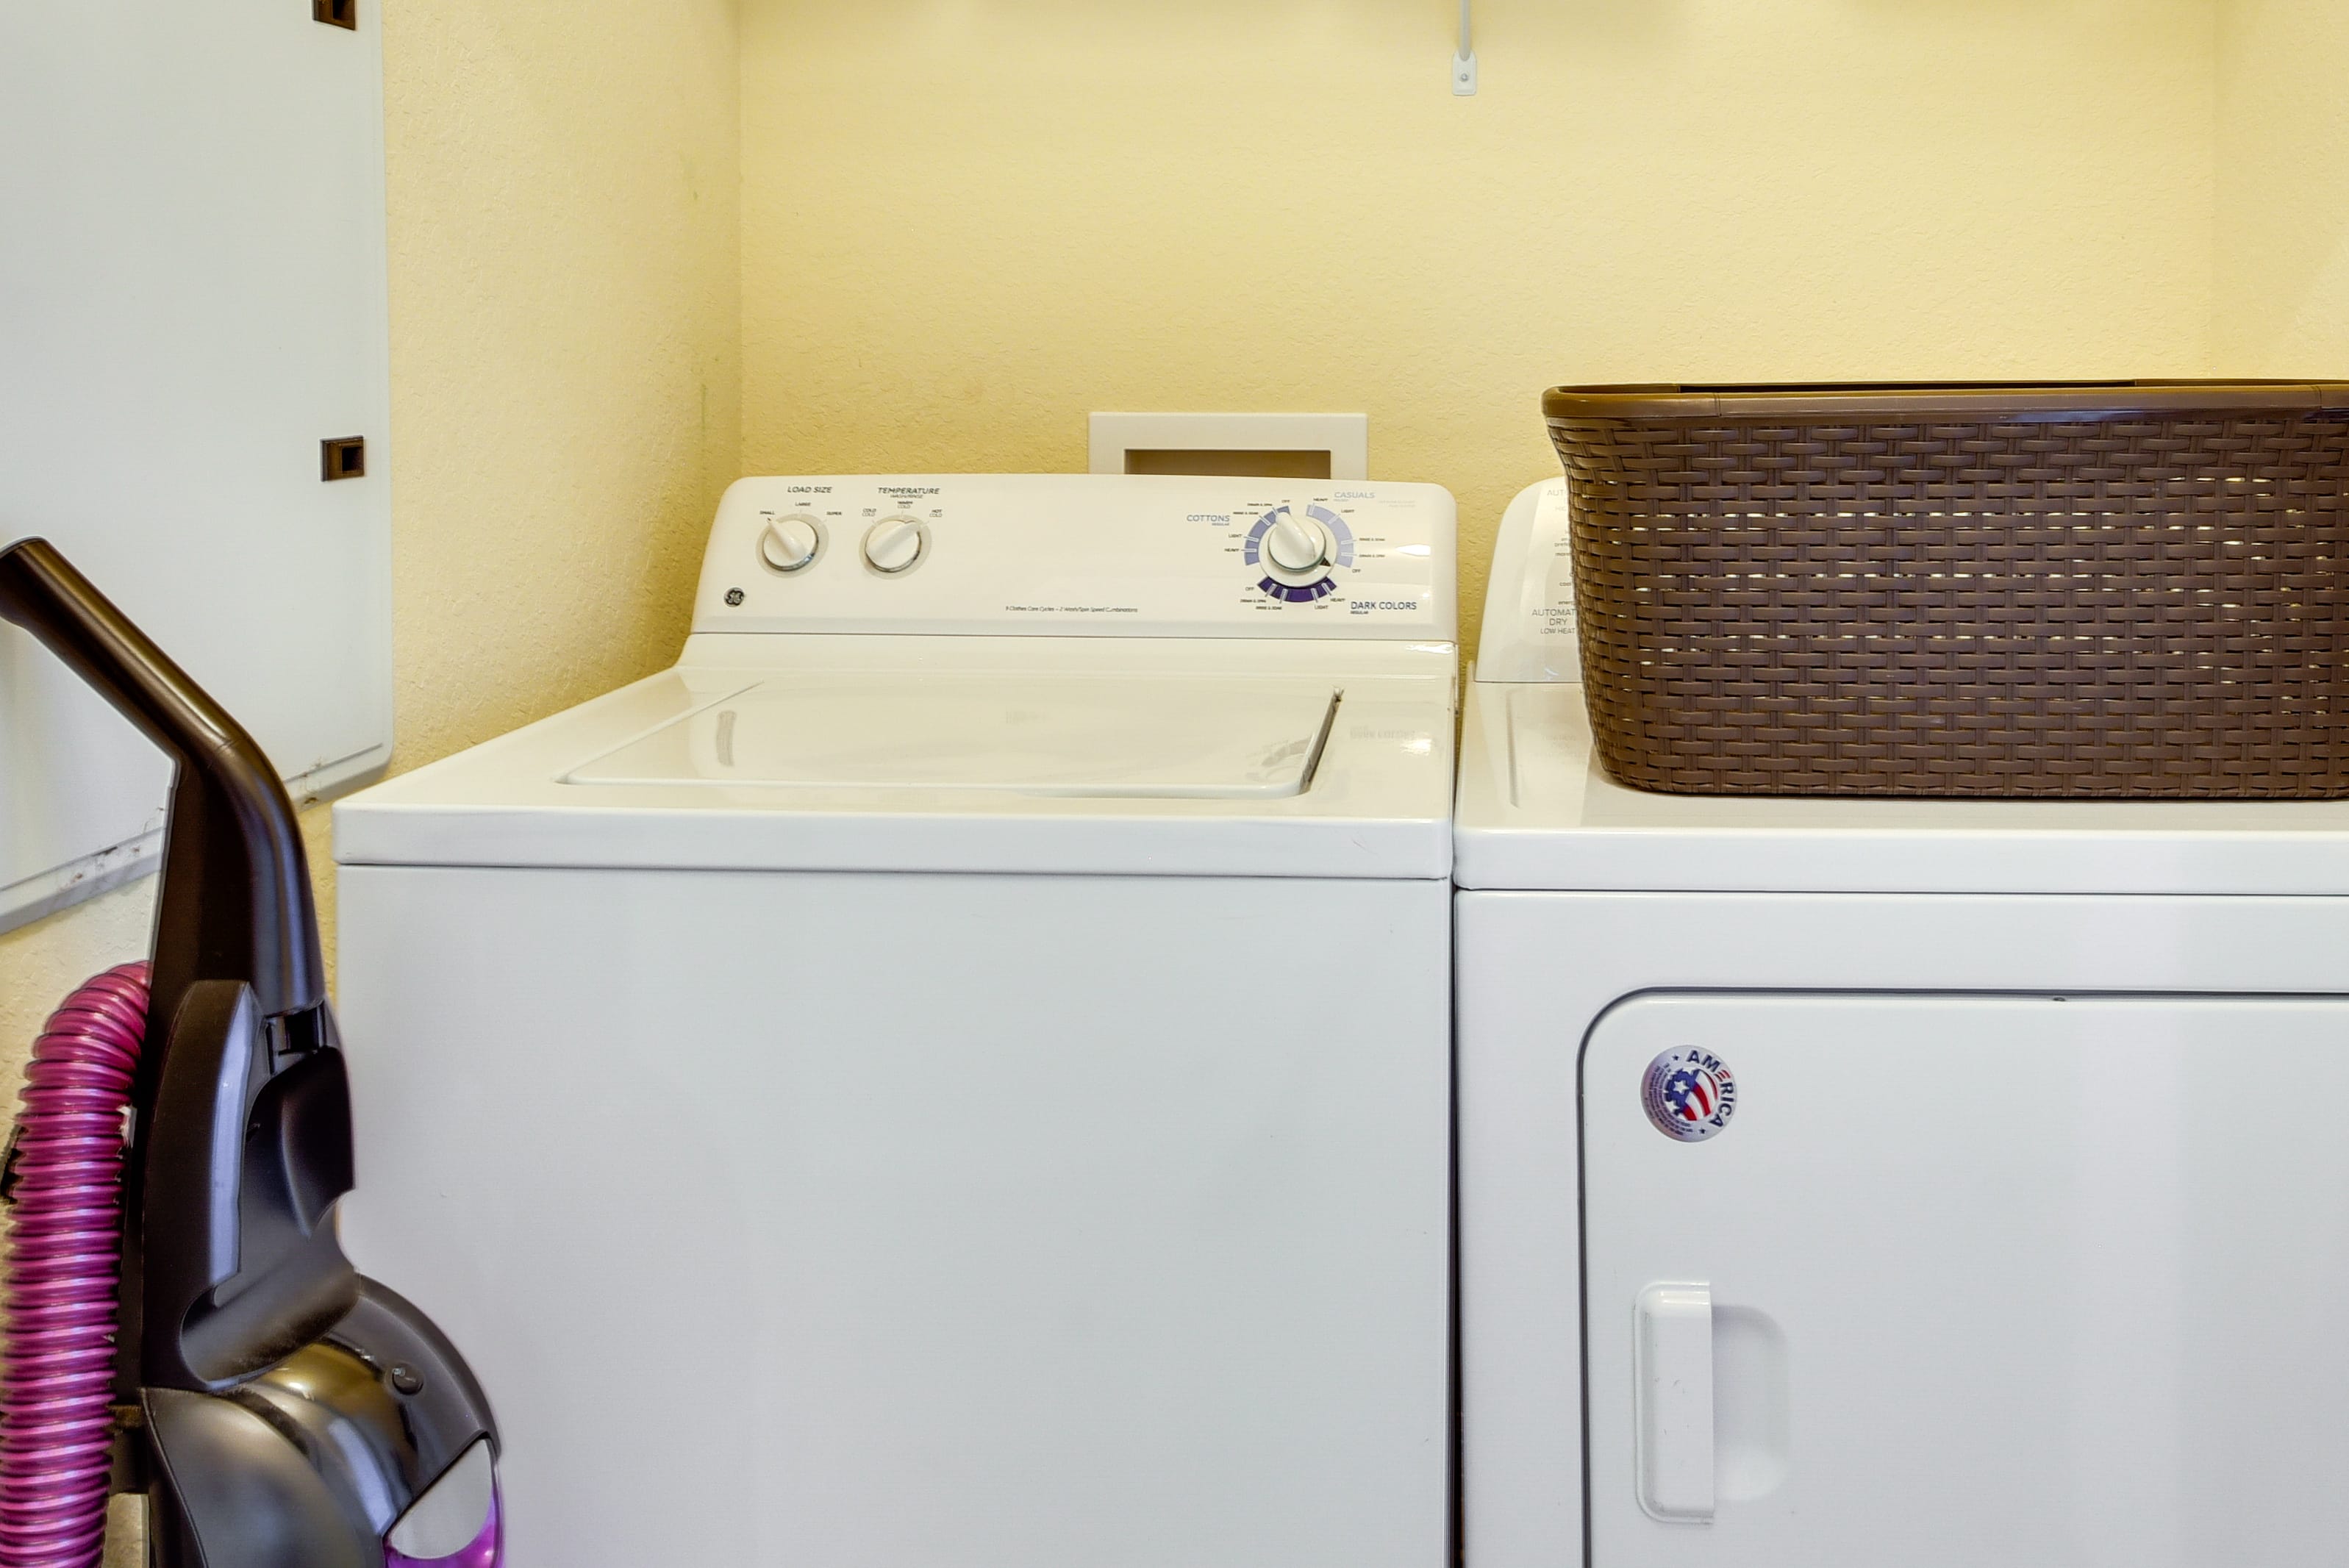 Laundry Area | Washer/Dryer | Laundry Detergent | Iron/Board